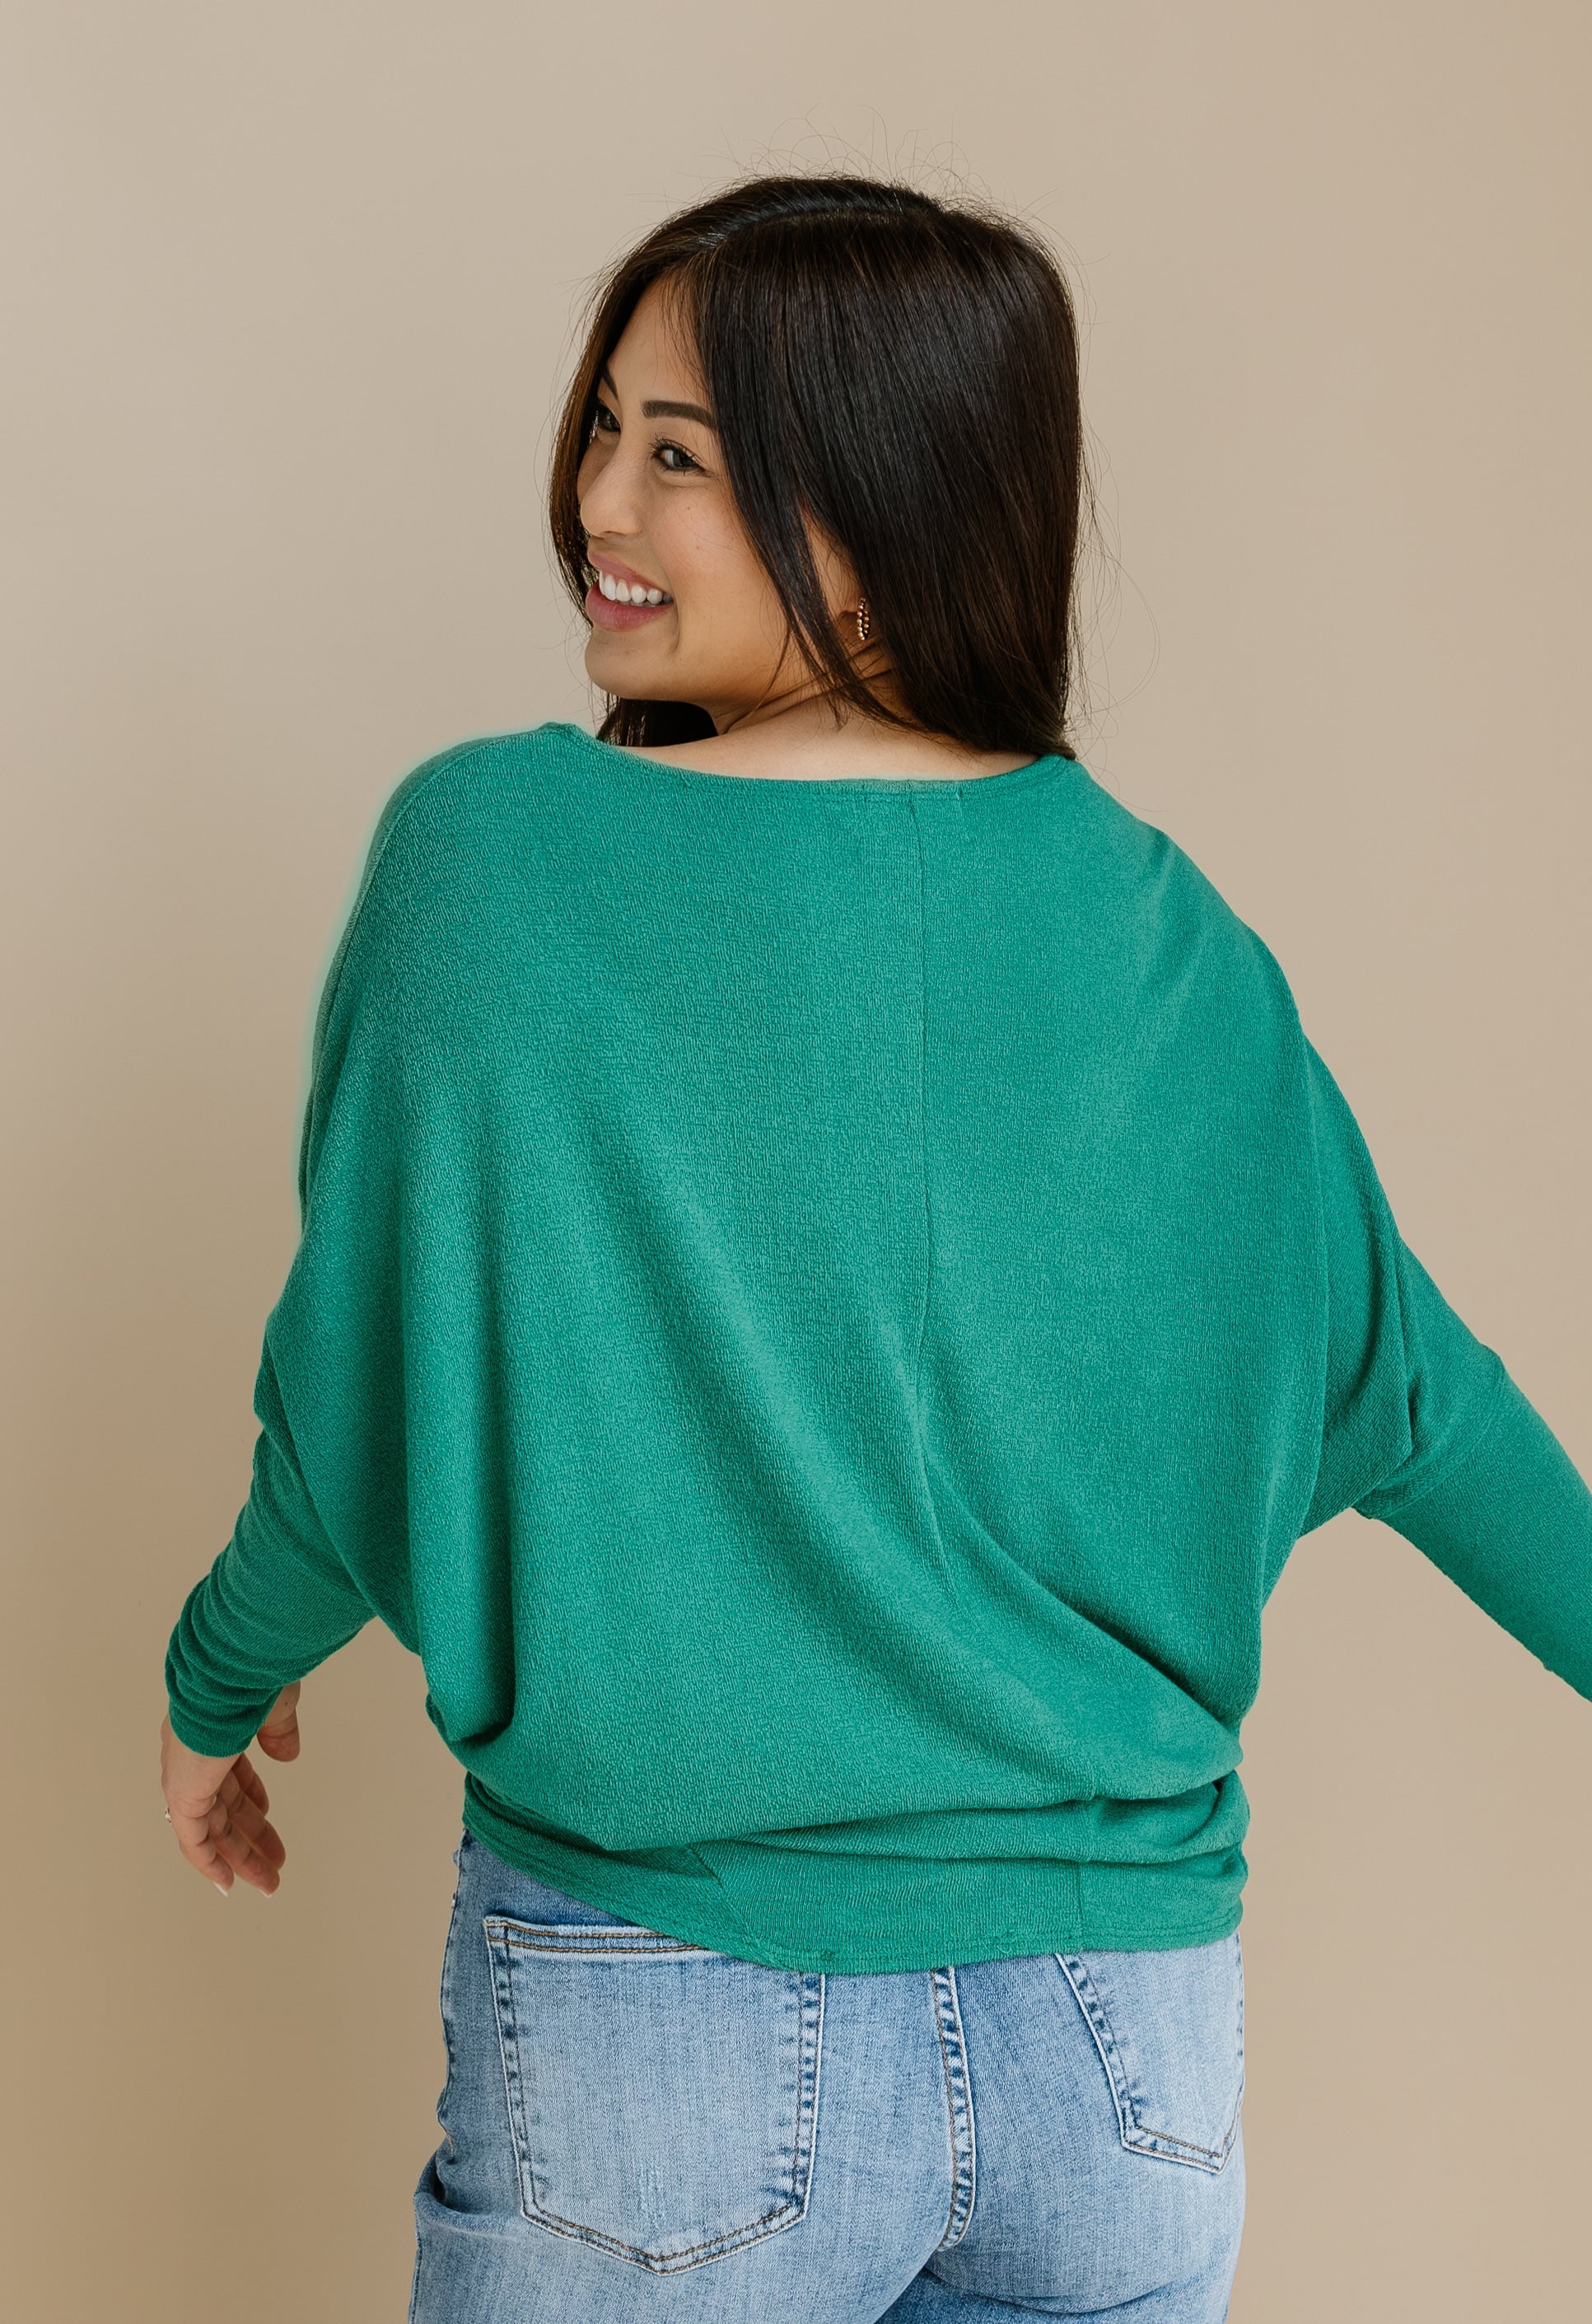 Favorite Comfy Tunic - TRUE GREEN - willows clothing L/S Shirt